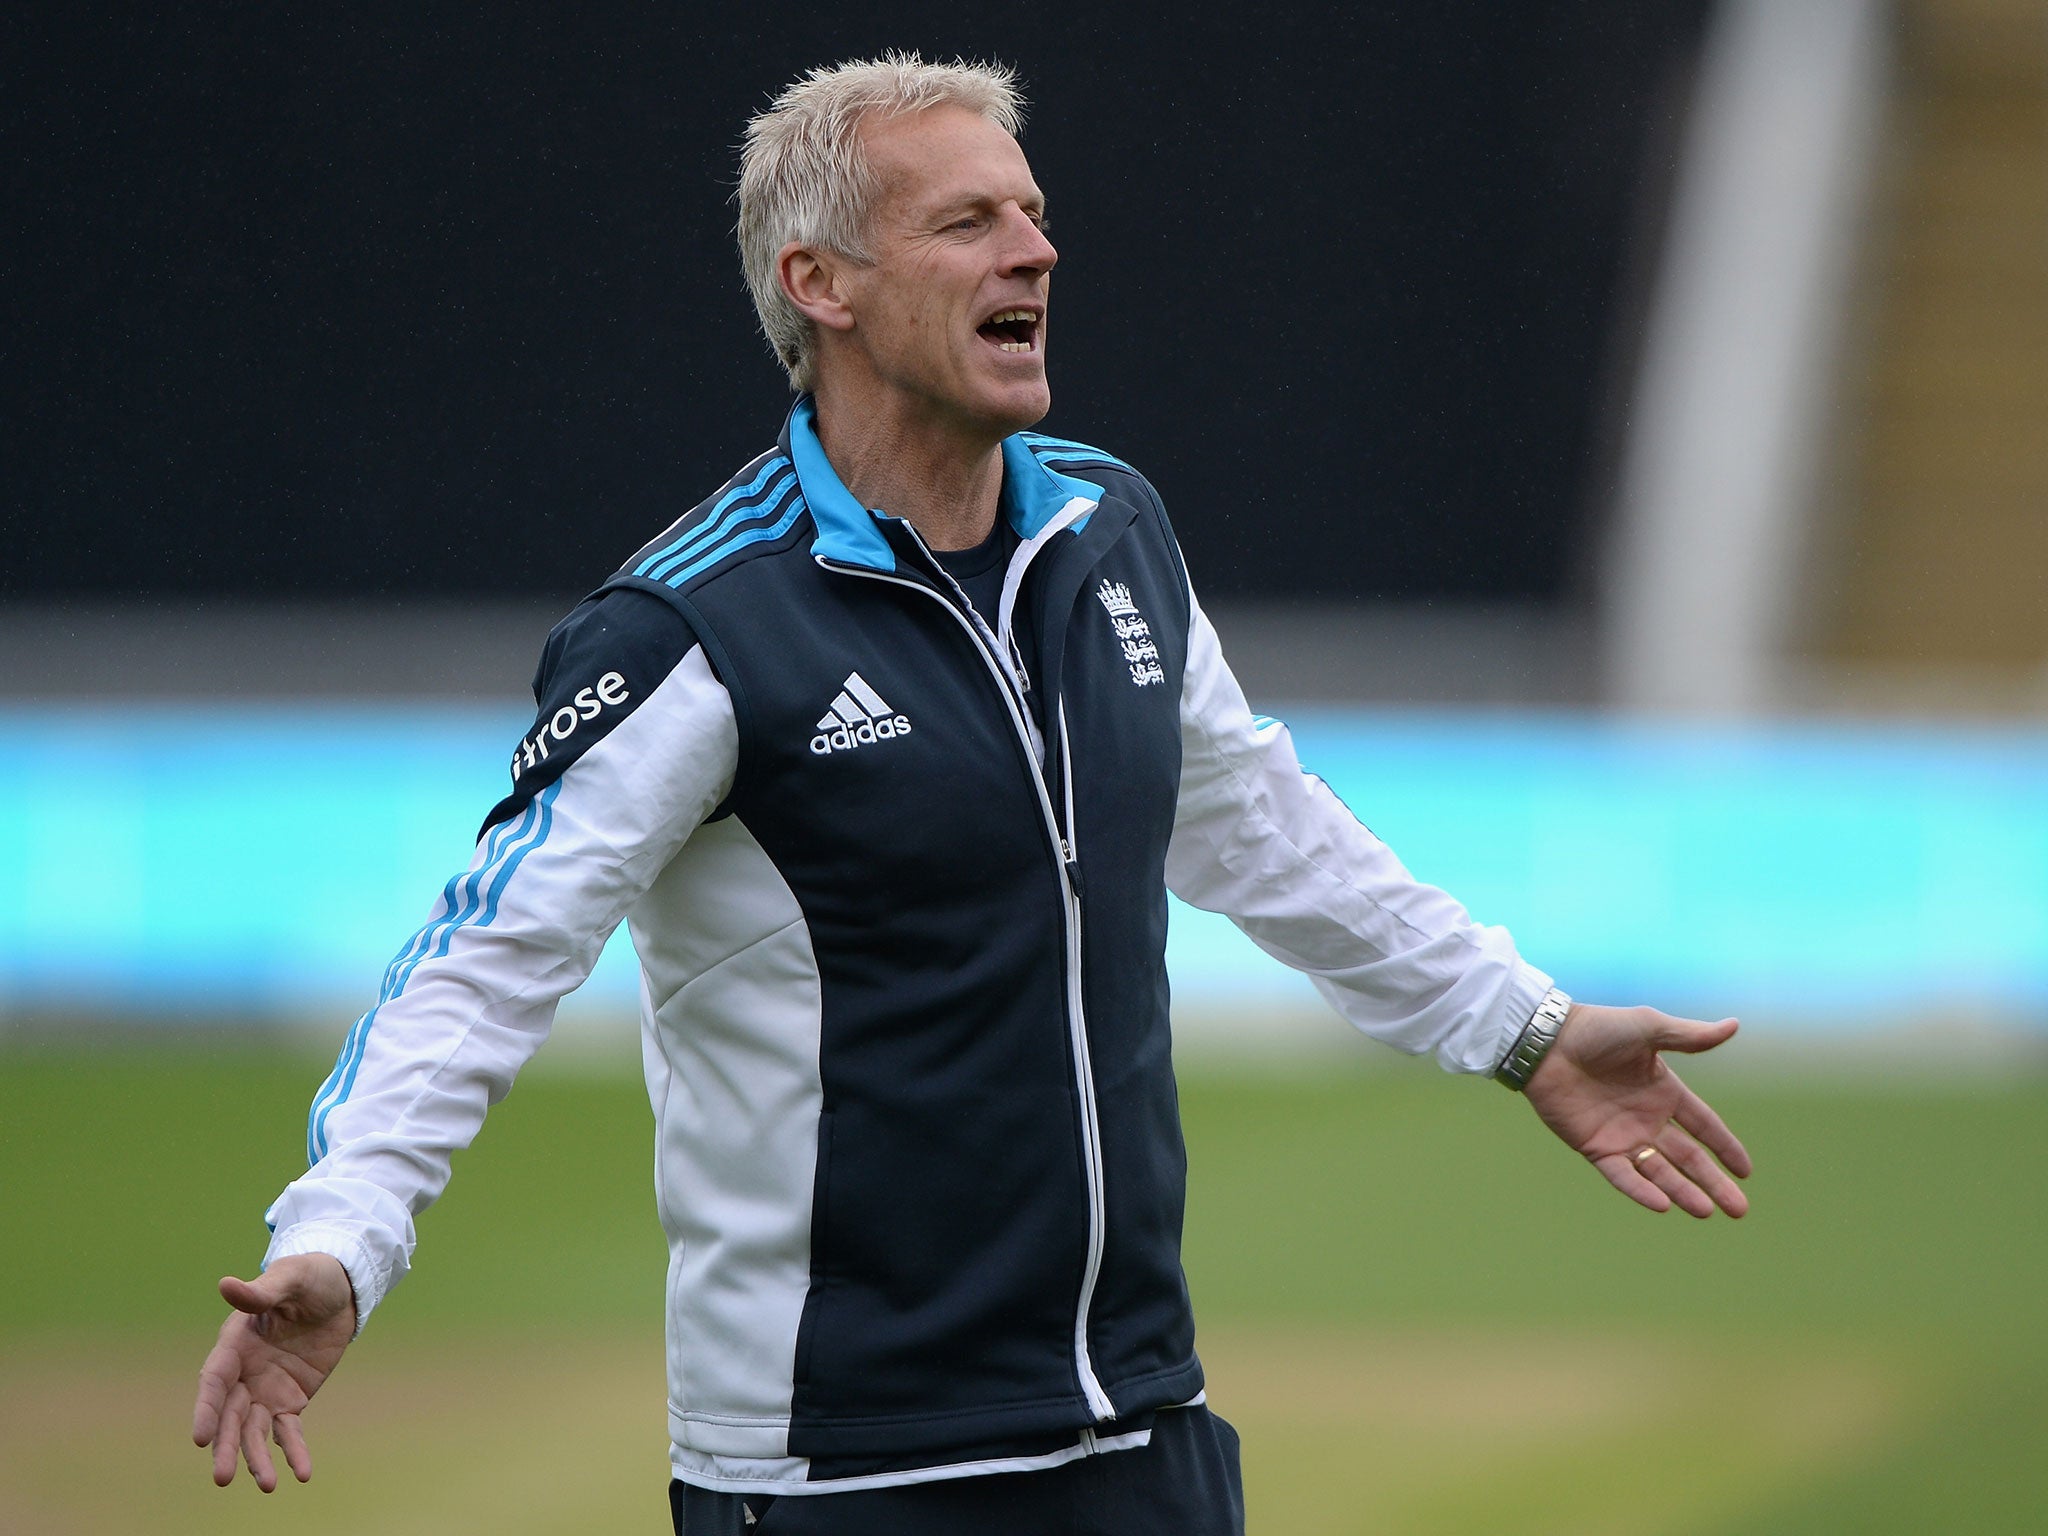 Peter Moores believes England can still salvage a draw in their ODI series with India